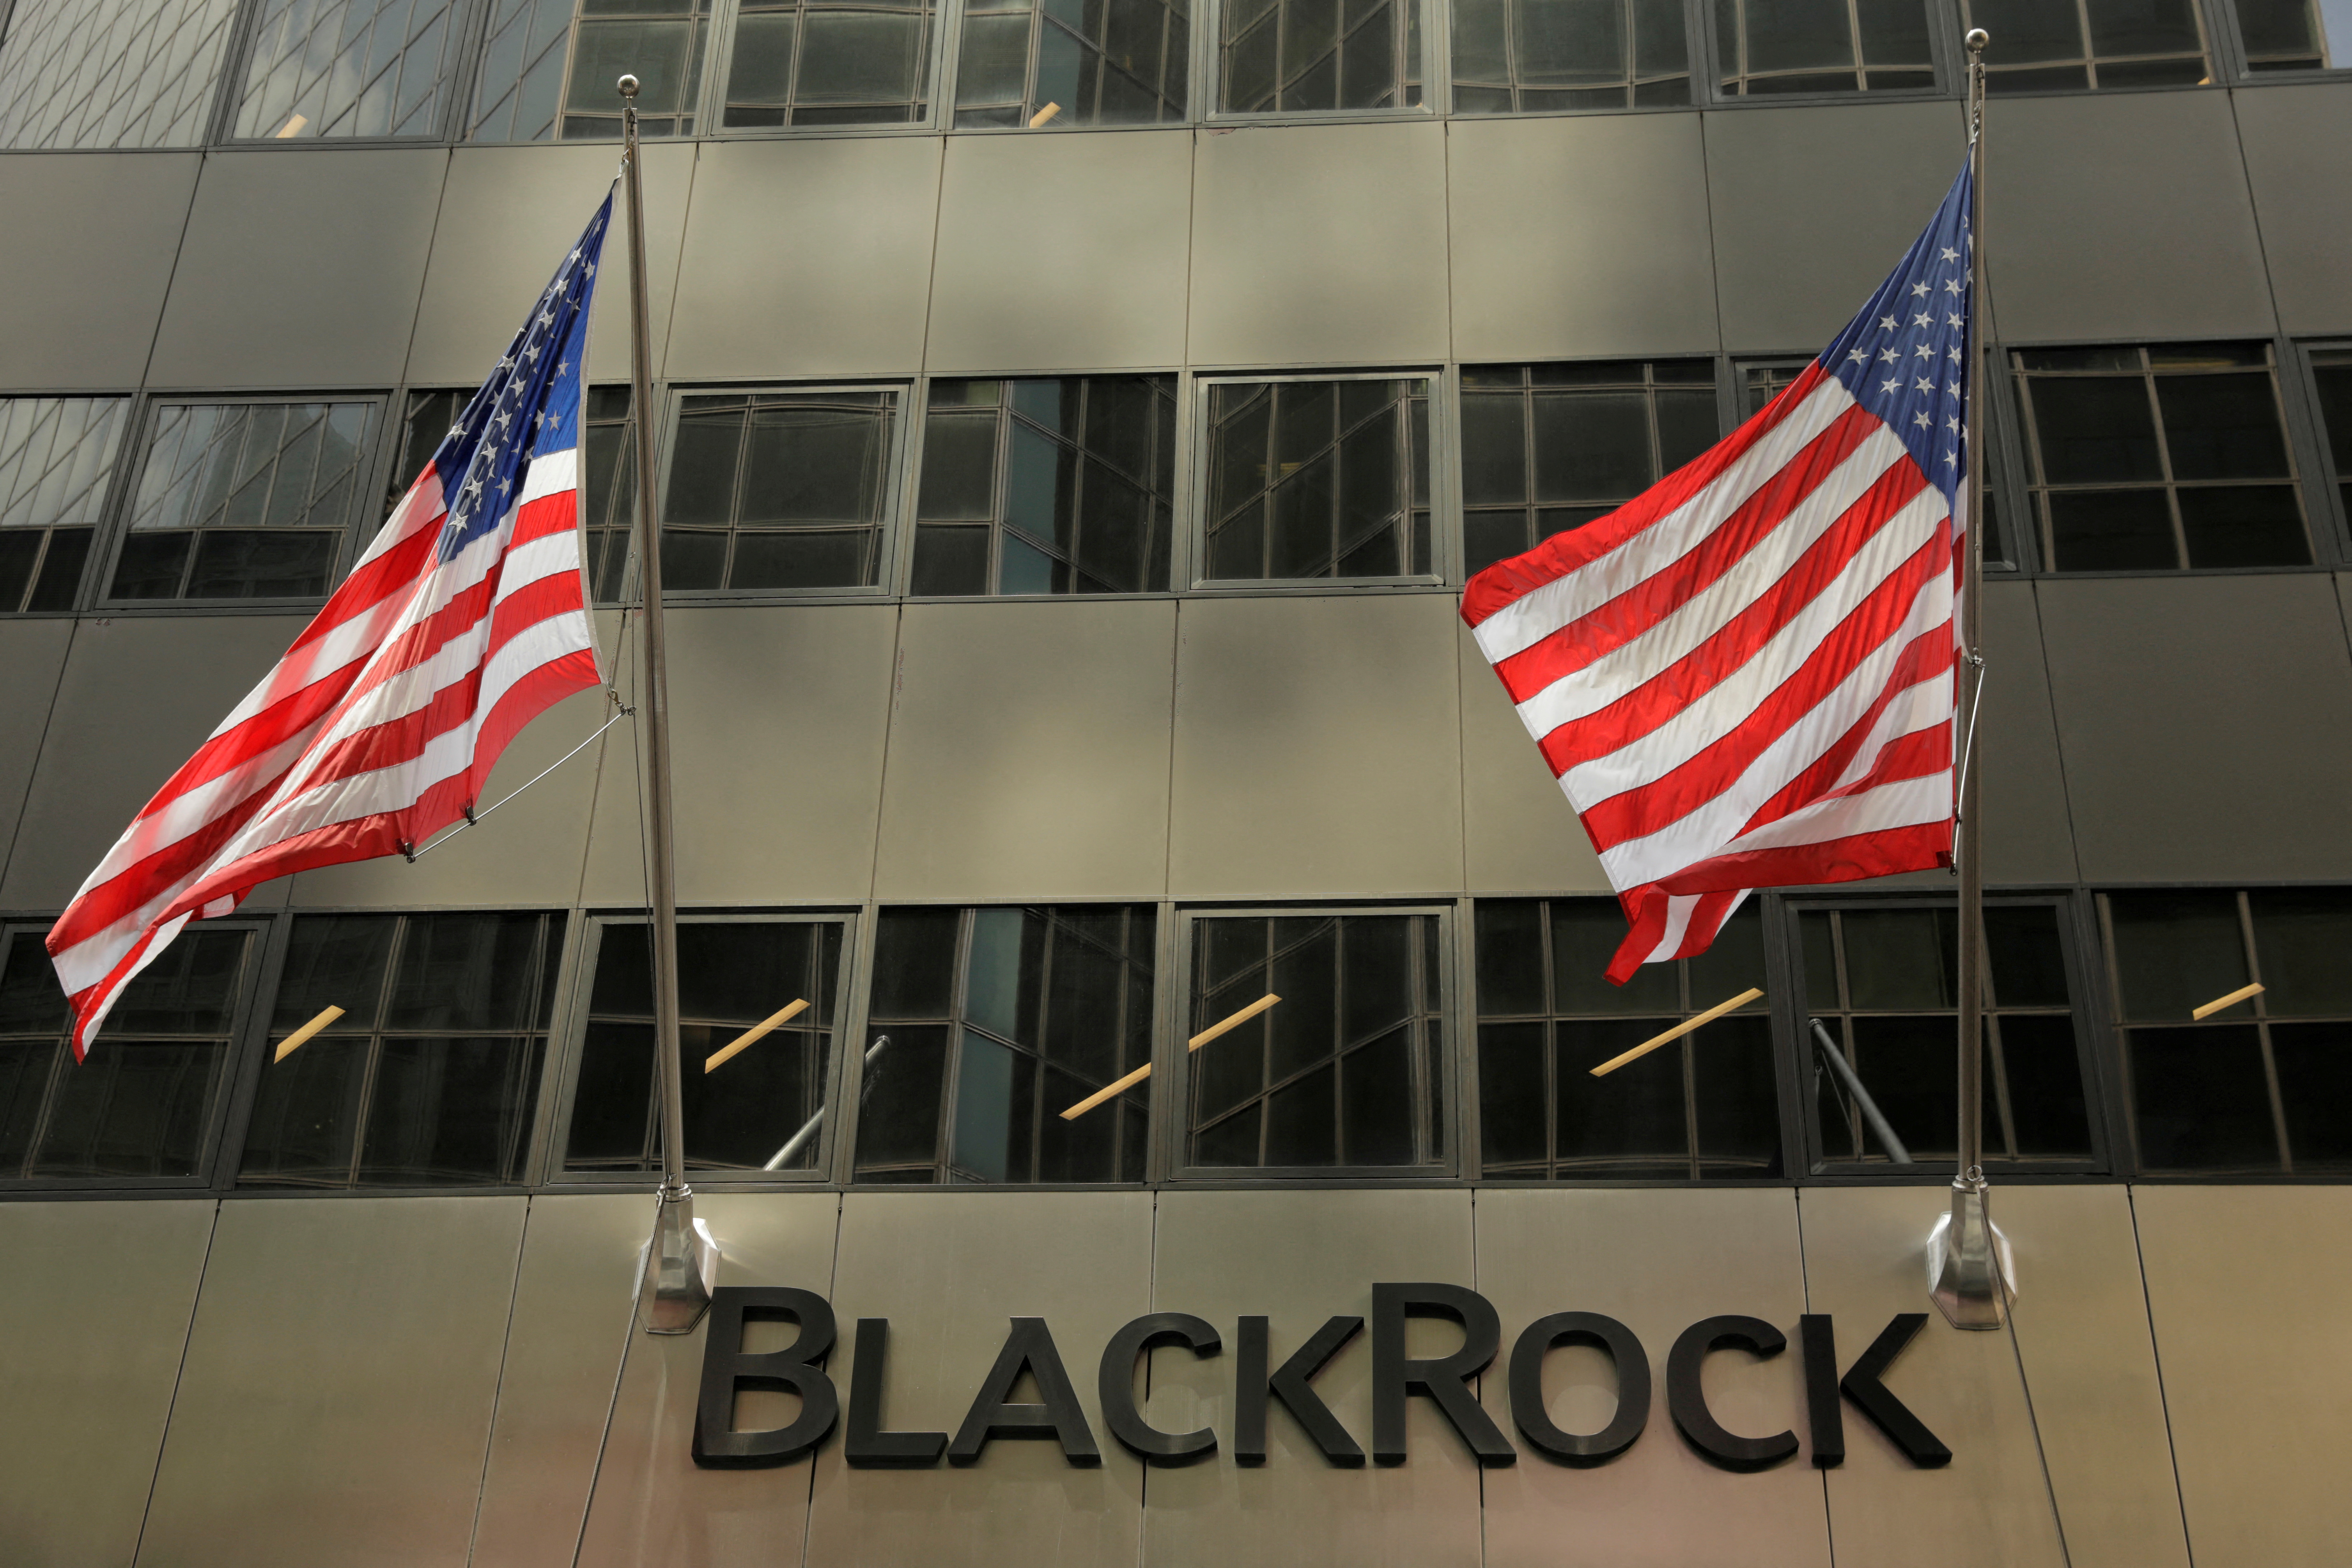 A sign for BlackRock Inc hangs above their building in New York U.S., July 16, 2018. REUTERS/Lucas Jackson/File Photo